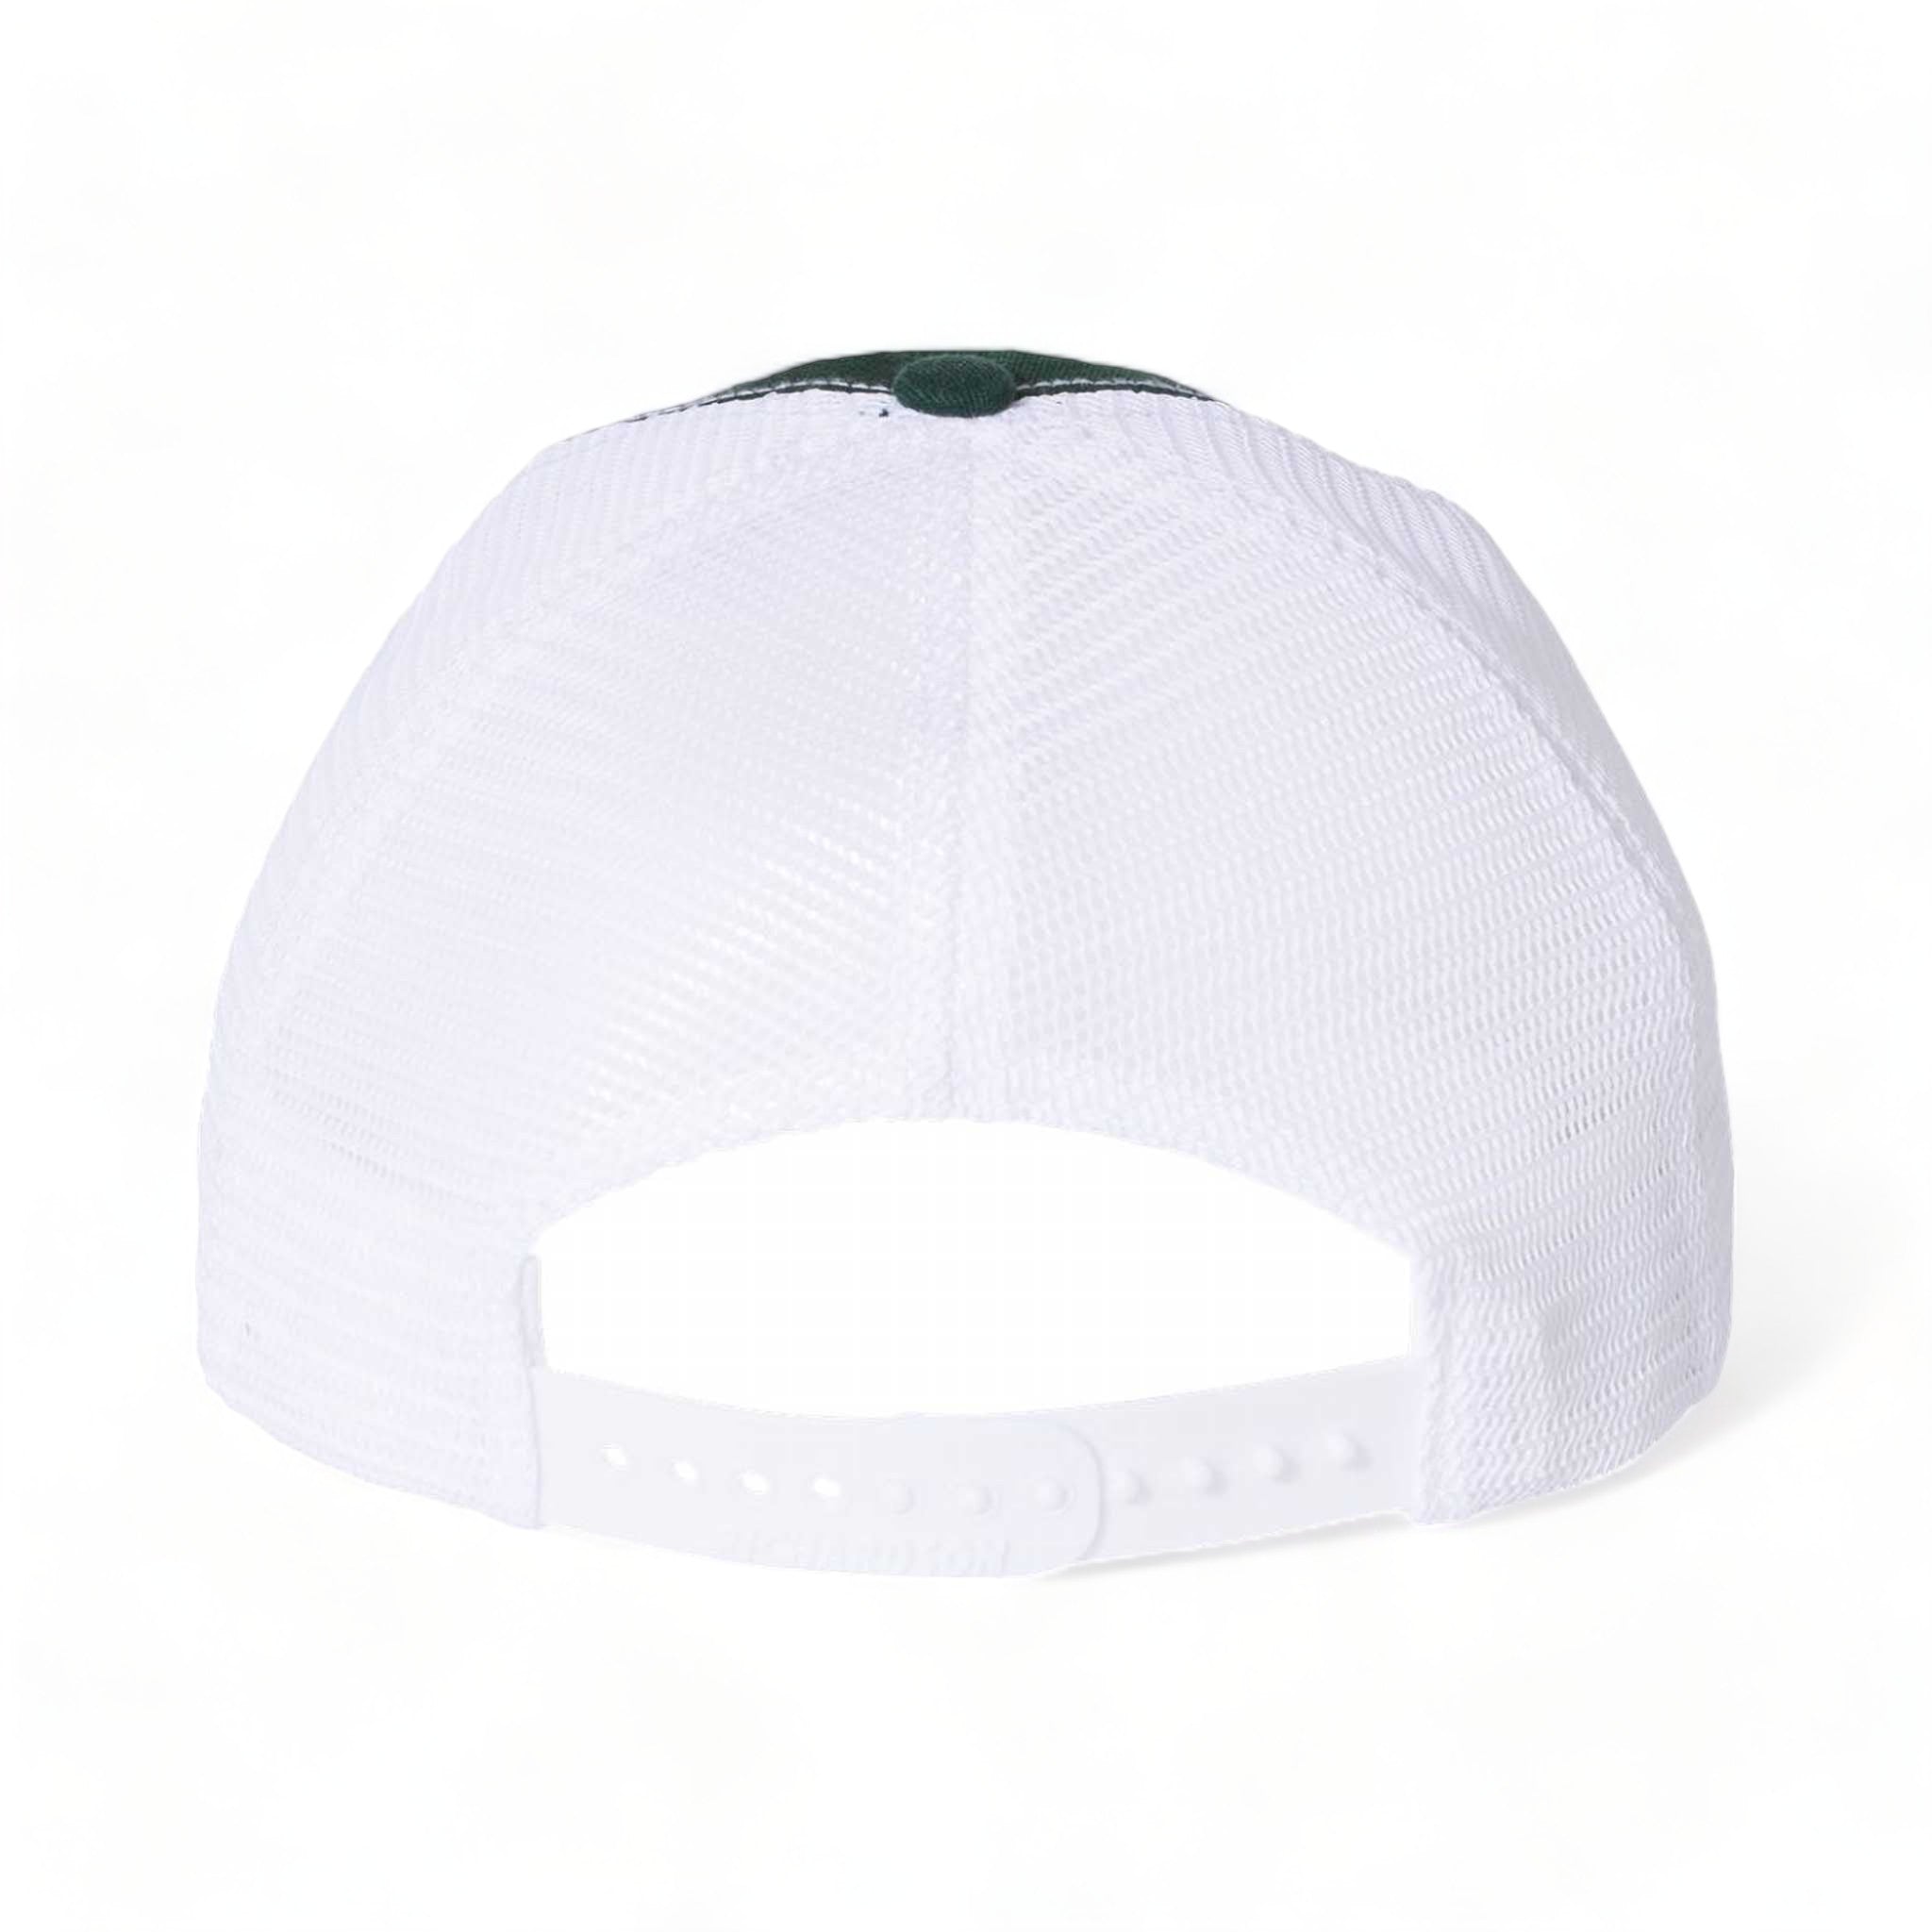 Back view of Richardson 111 custom hat in dark green and white